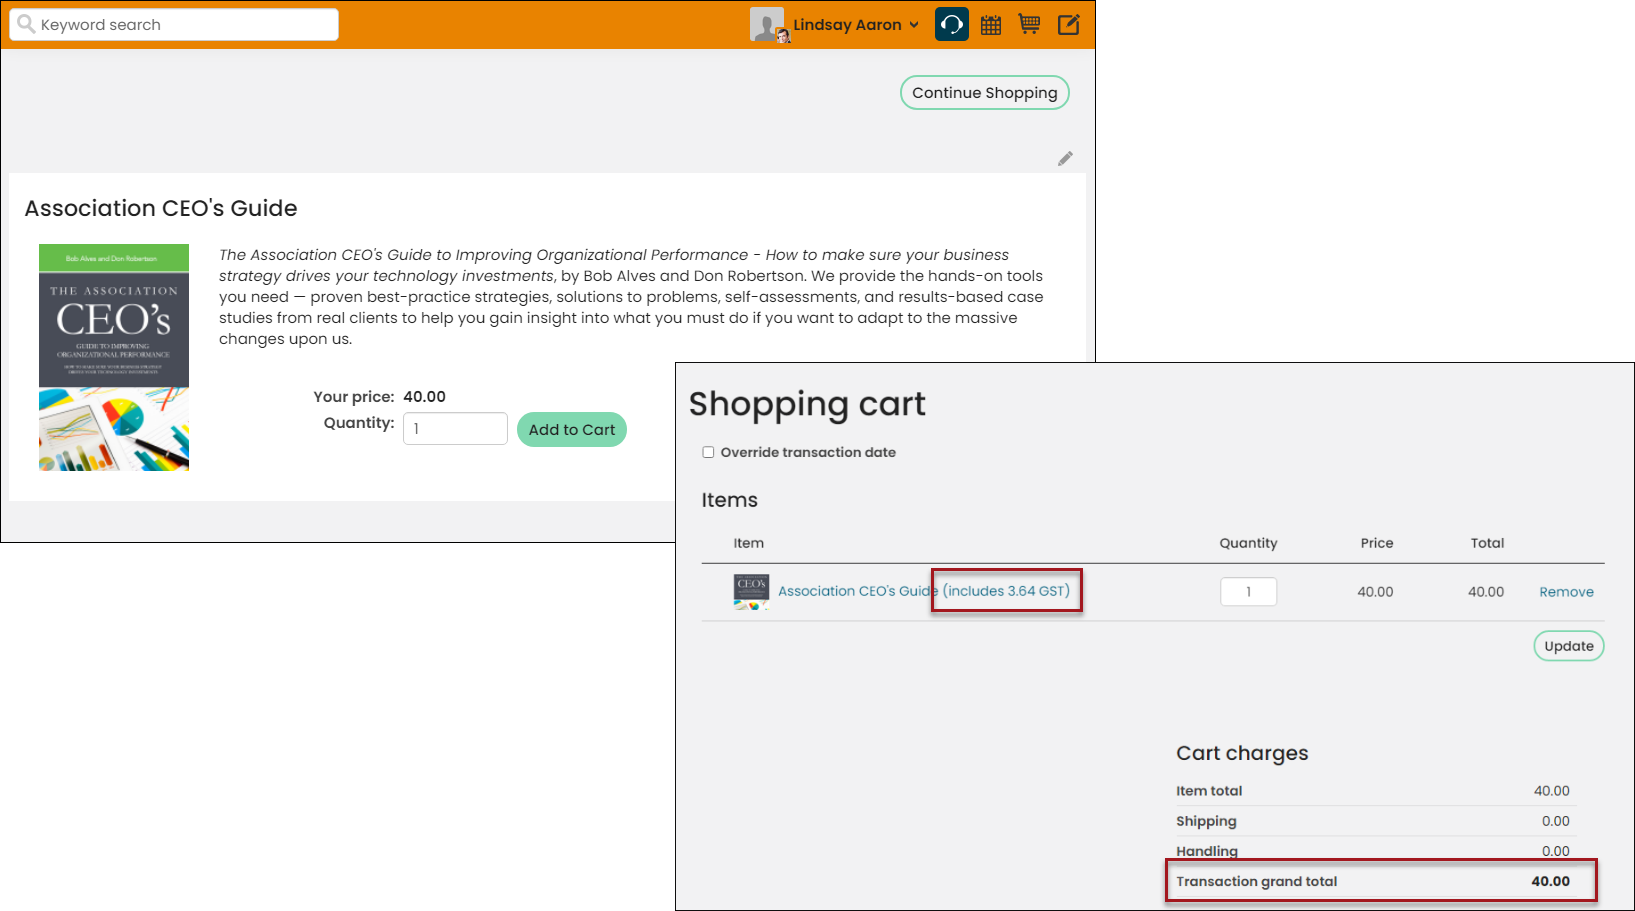 Showing the GST added to a product in the cart